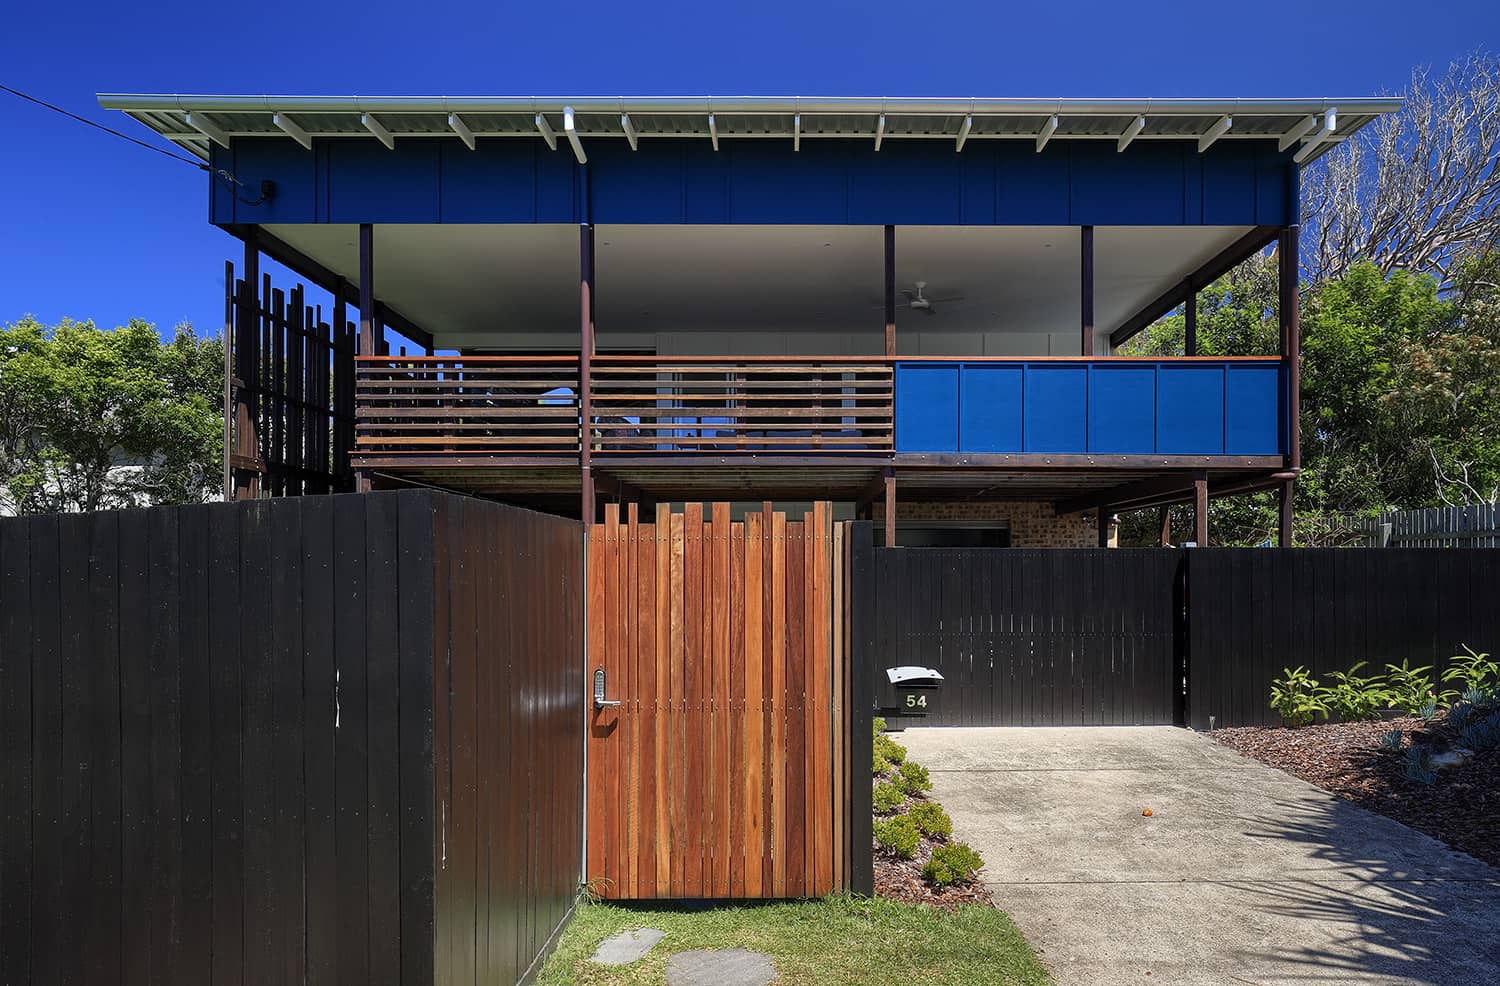 Elanda Street project by mdesign, a building design practice that operates on the Sunshine Coast.